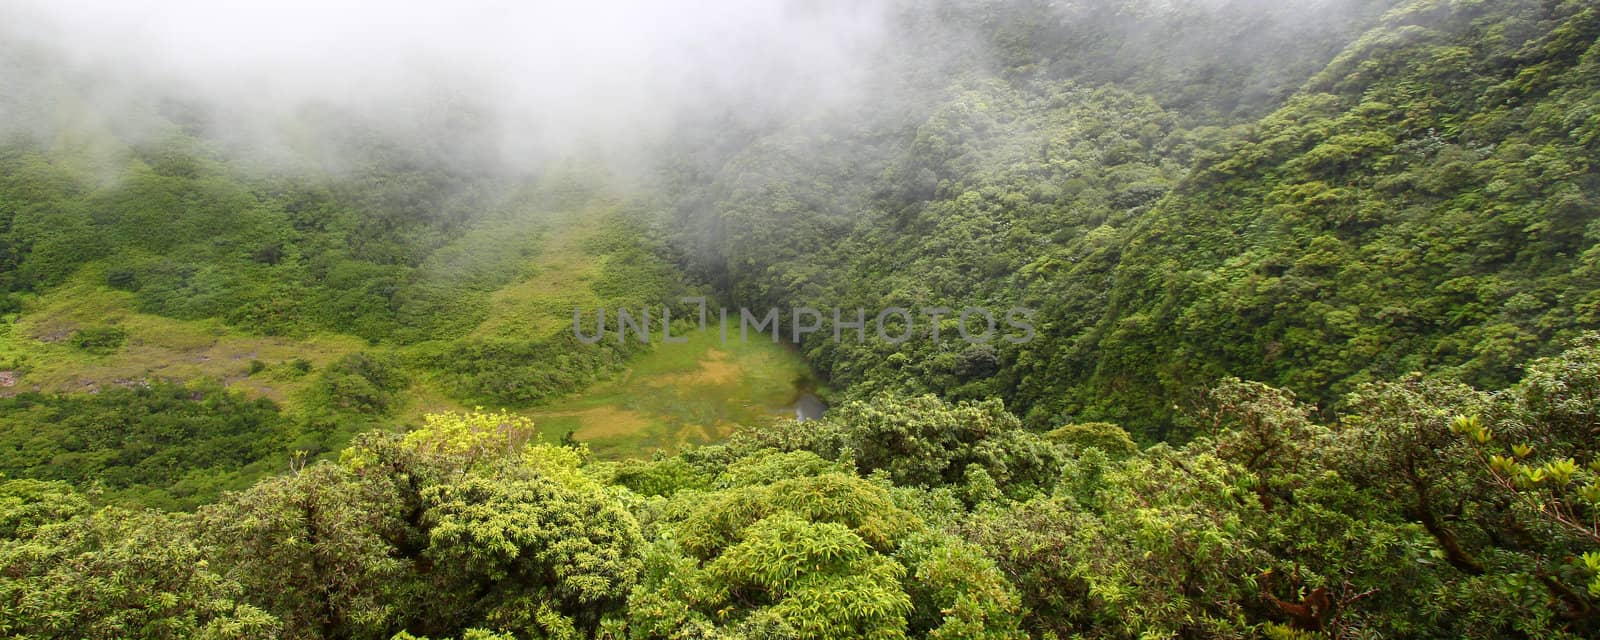 Fog descends into "The Crater" below Mount Liamuiga on Saint Kitts.